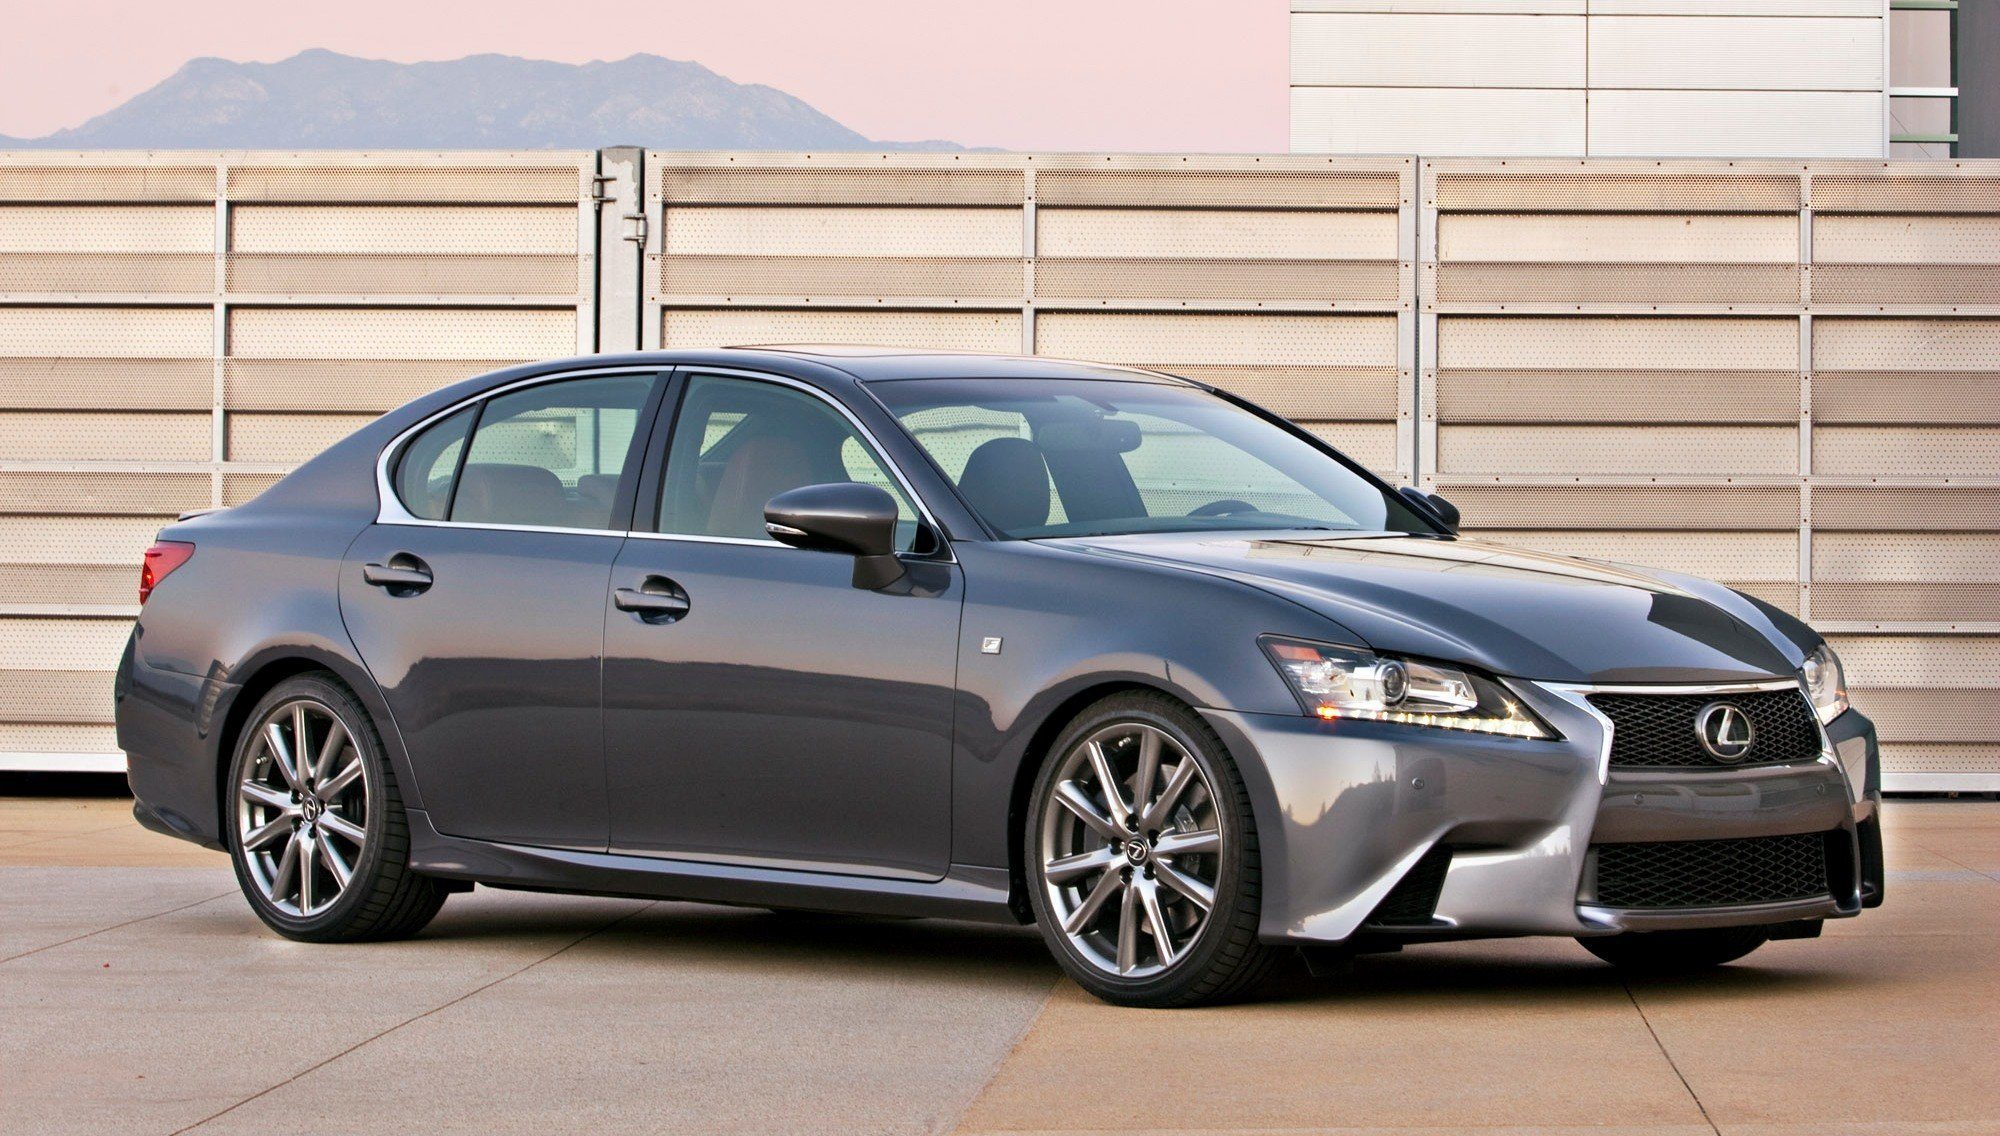 2014 Lexus GS350 and GS F Sport - Buyers Guide Info 21